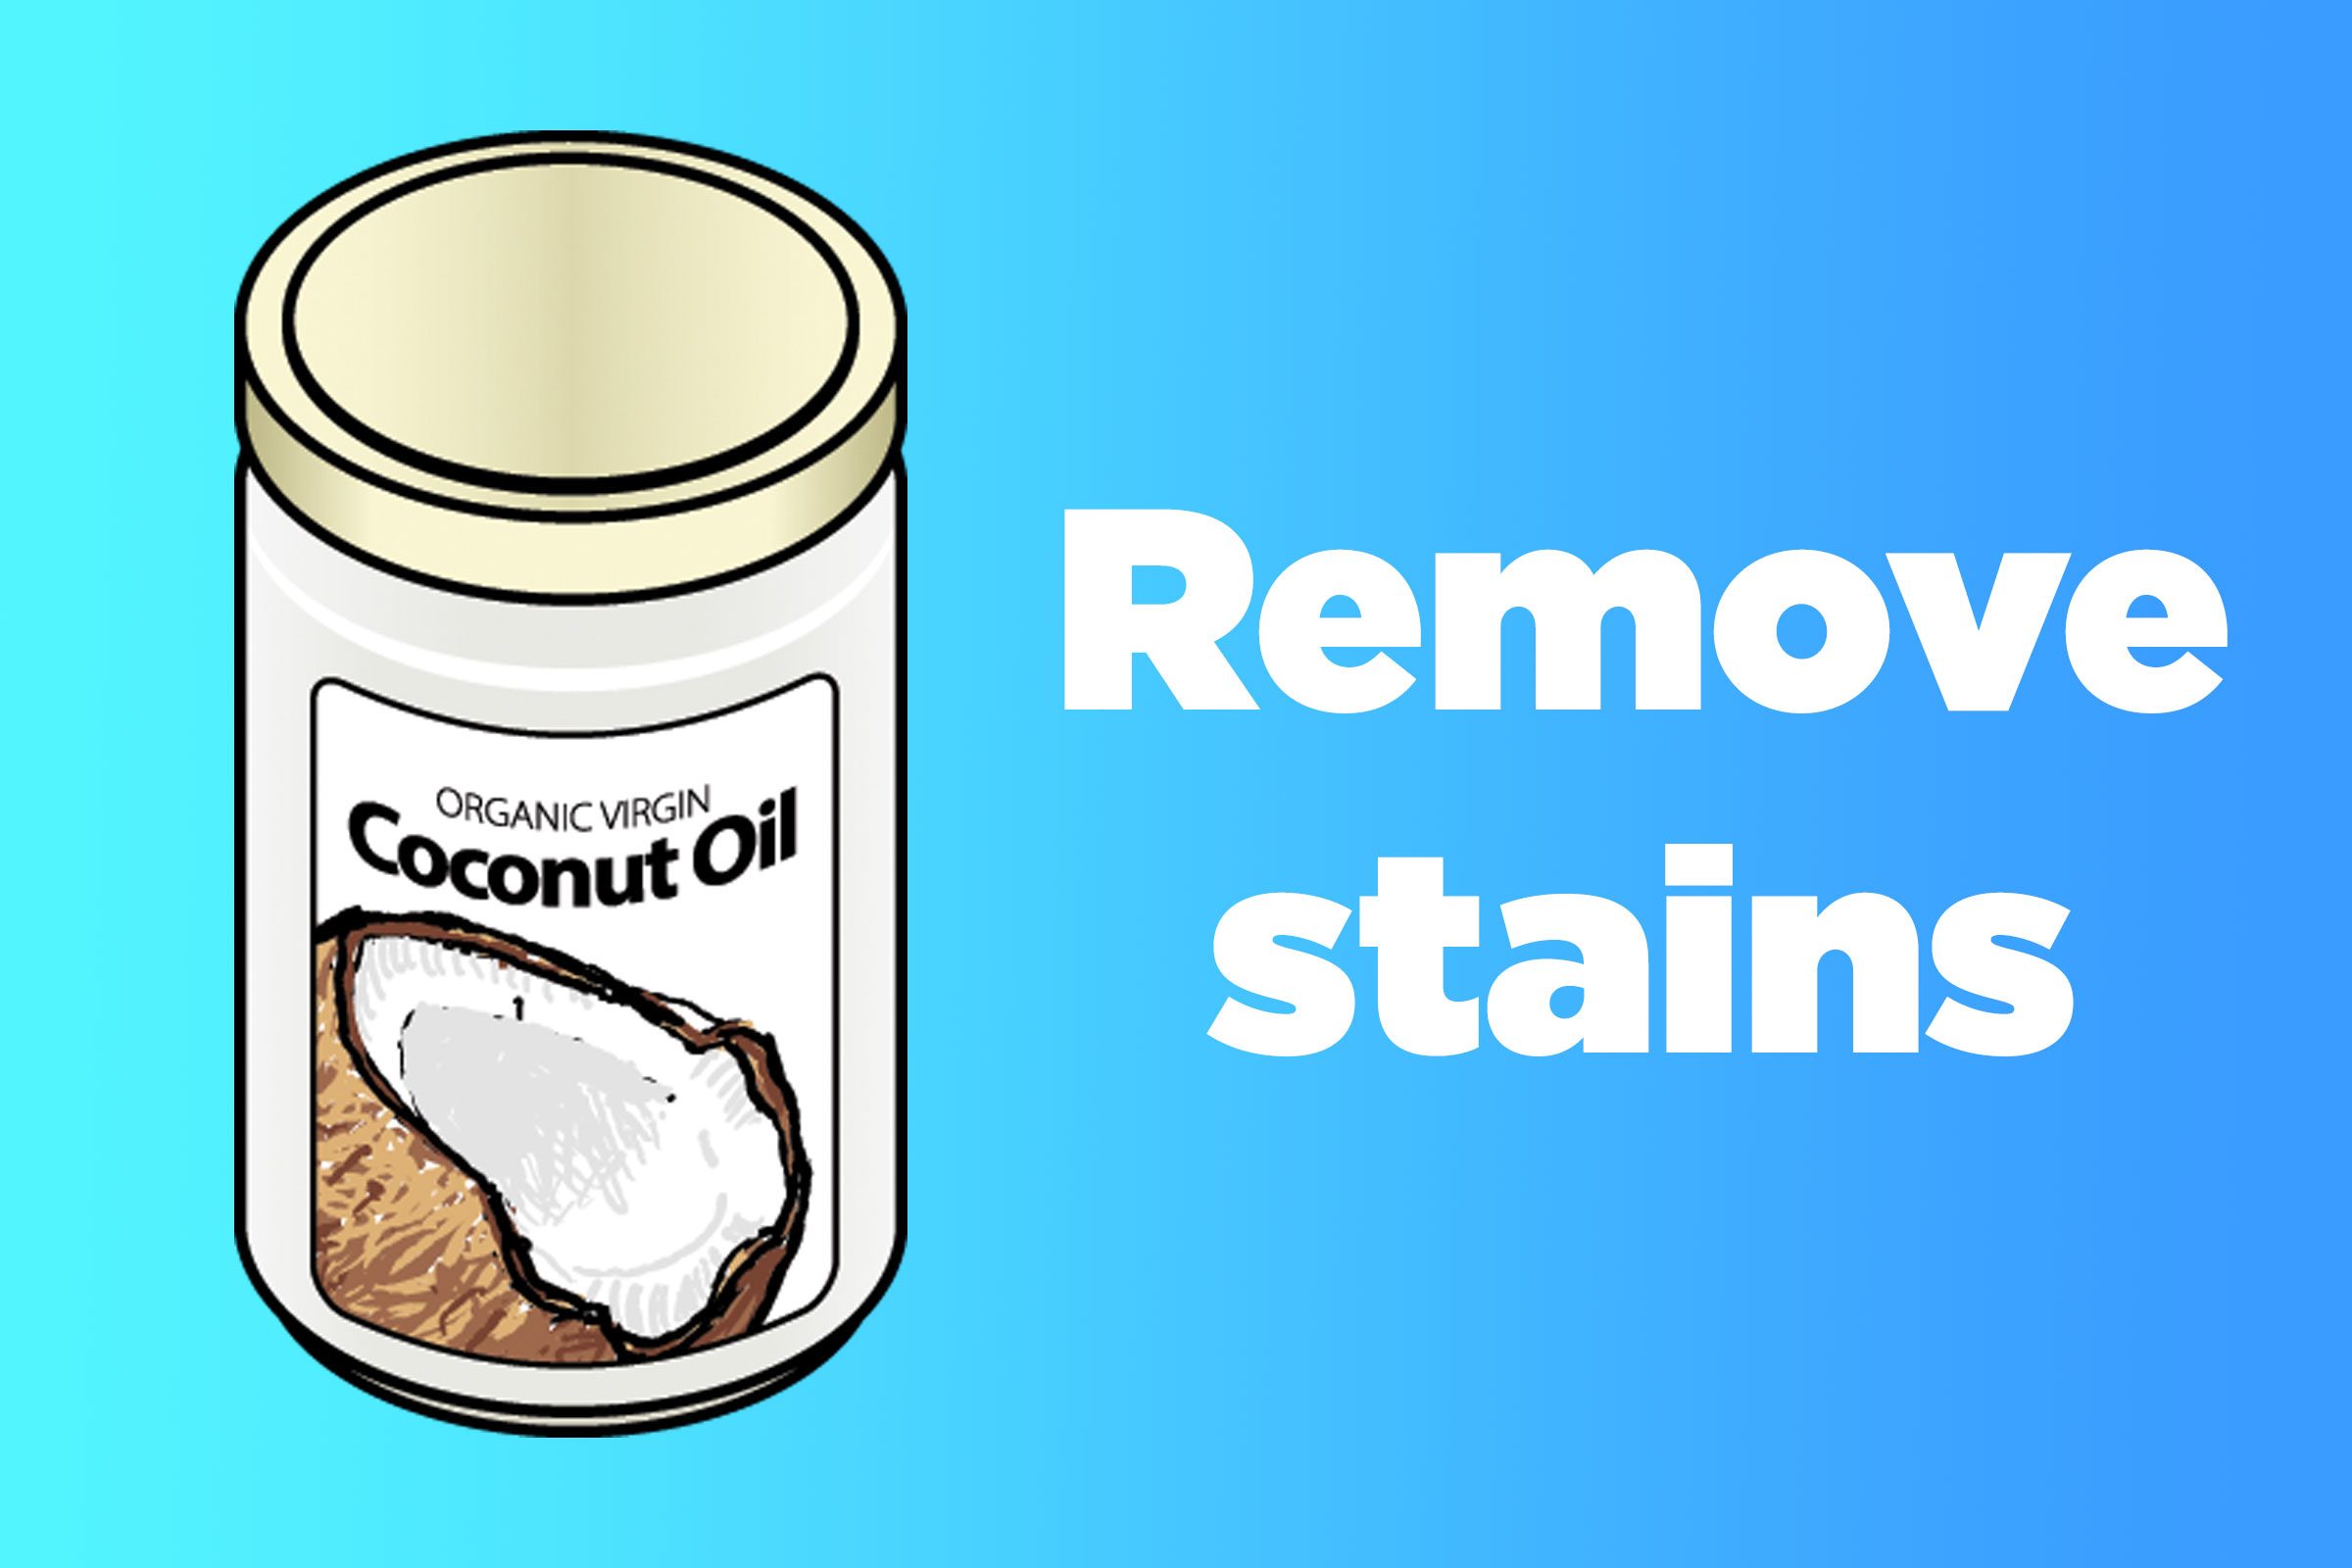 Guide to Removing Coconut Oil Stains From Clothes & Surfaces